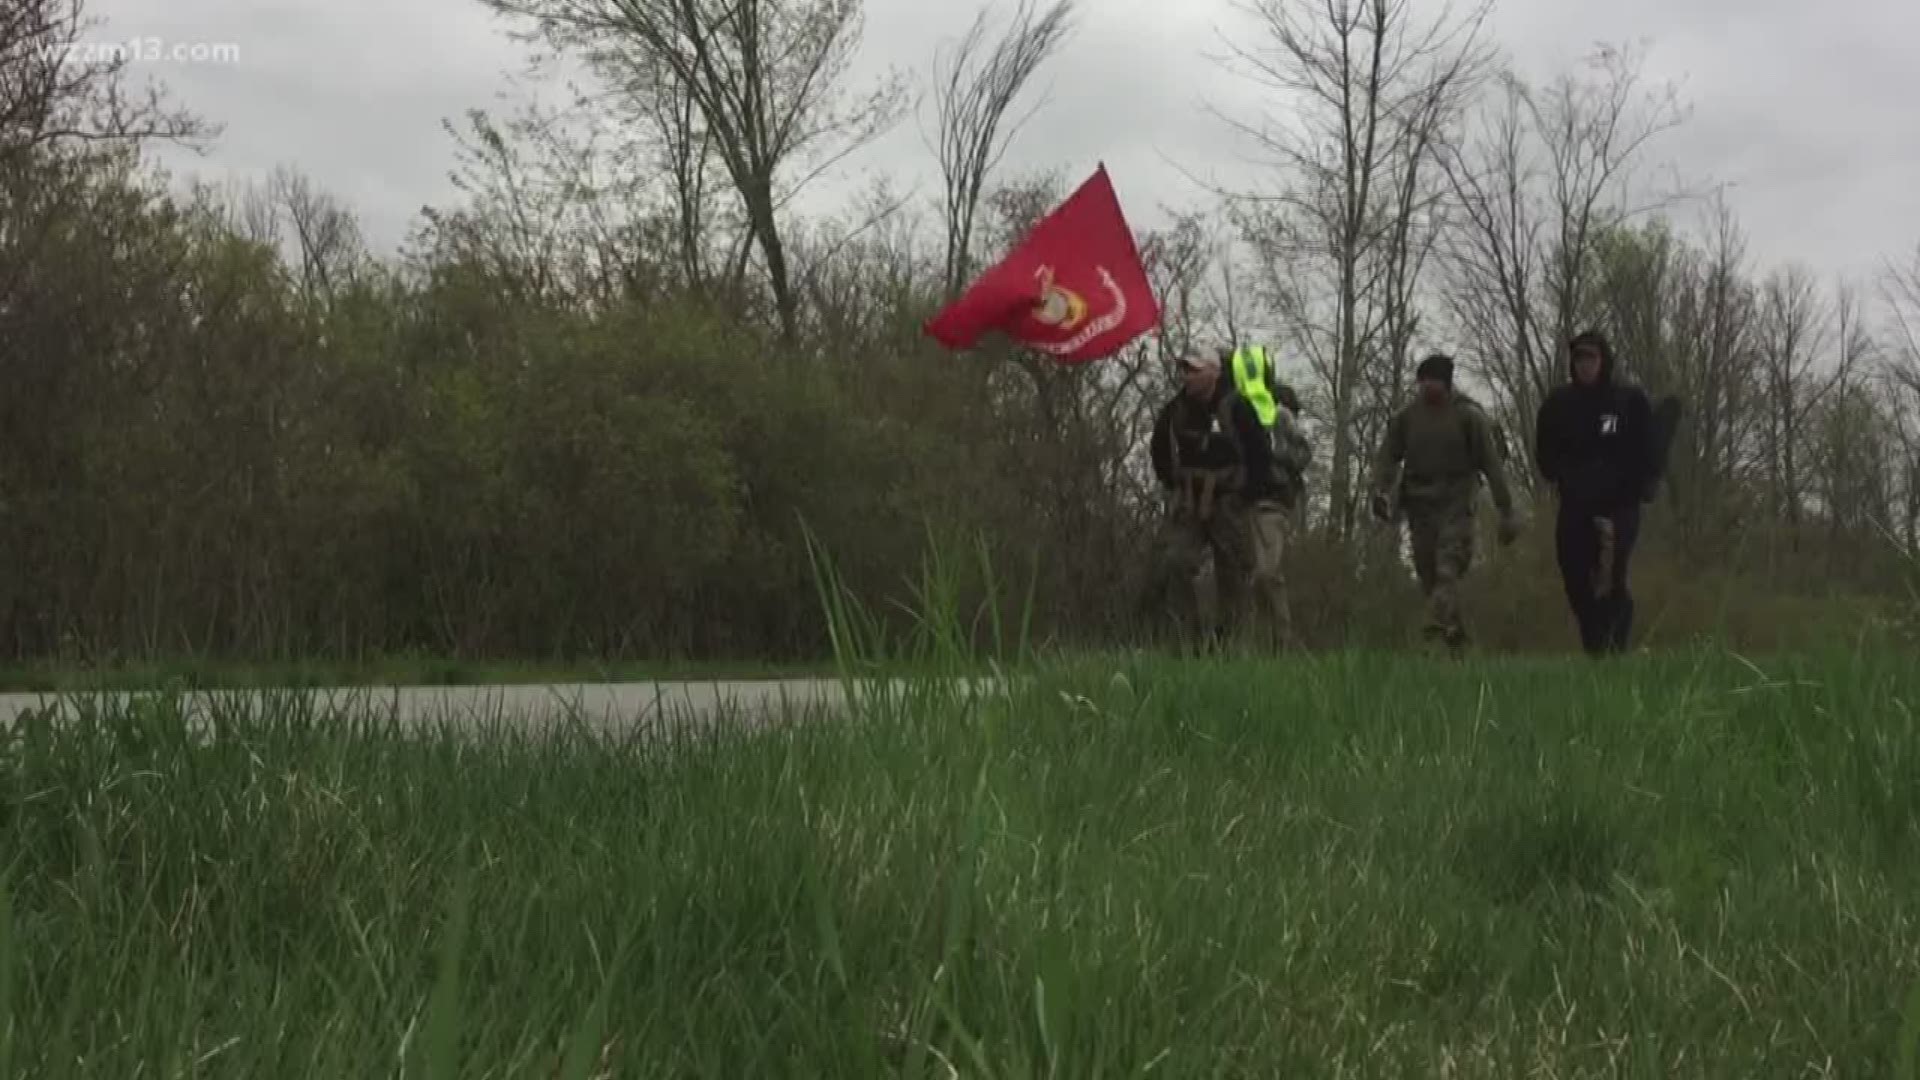 92 for 22 started their 92-mile ruck Thursday morning, April 25 at the Veterans Memorial Park in Grand Rapids.